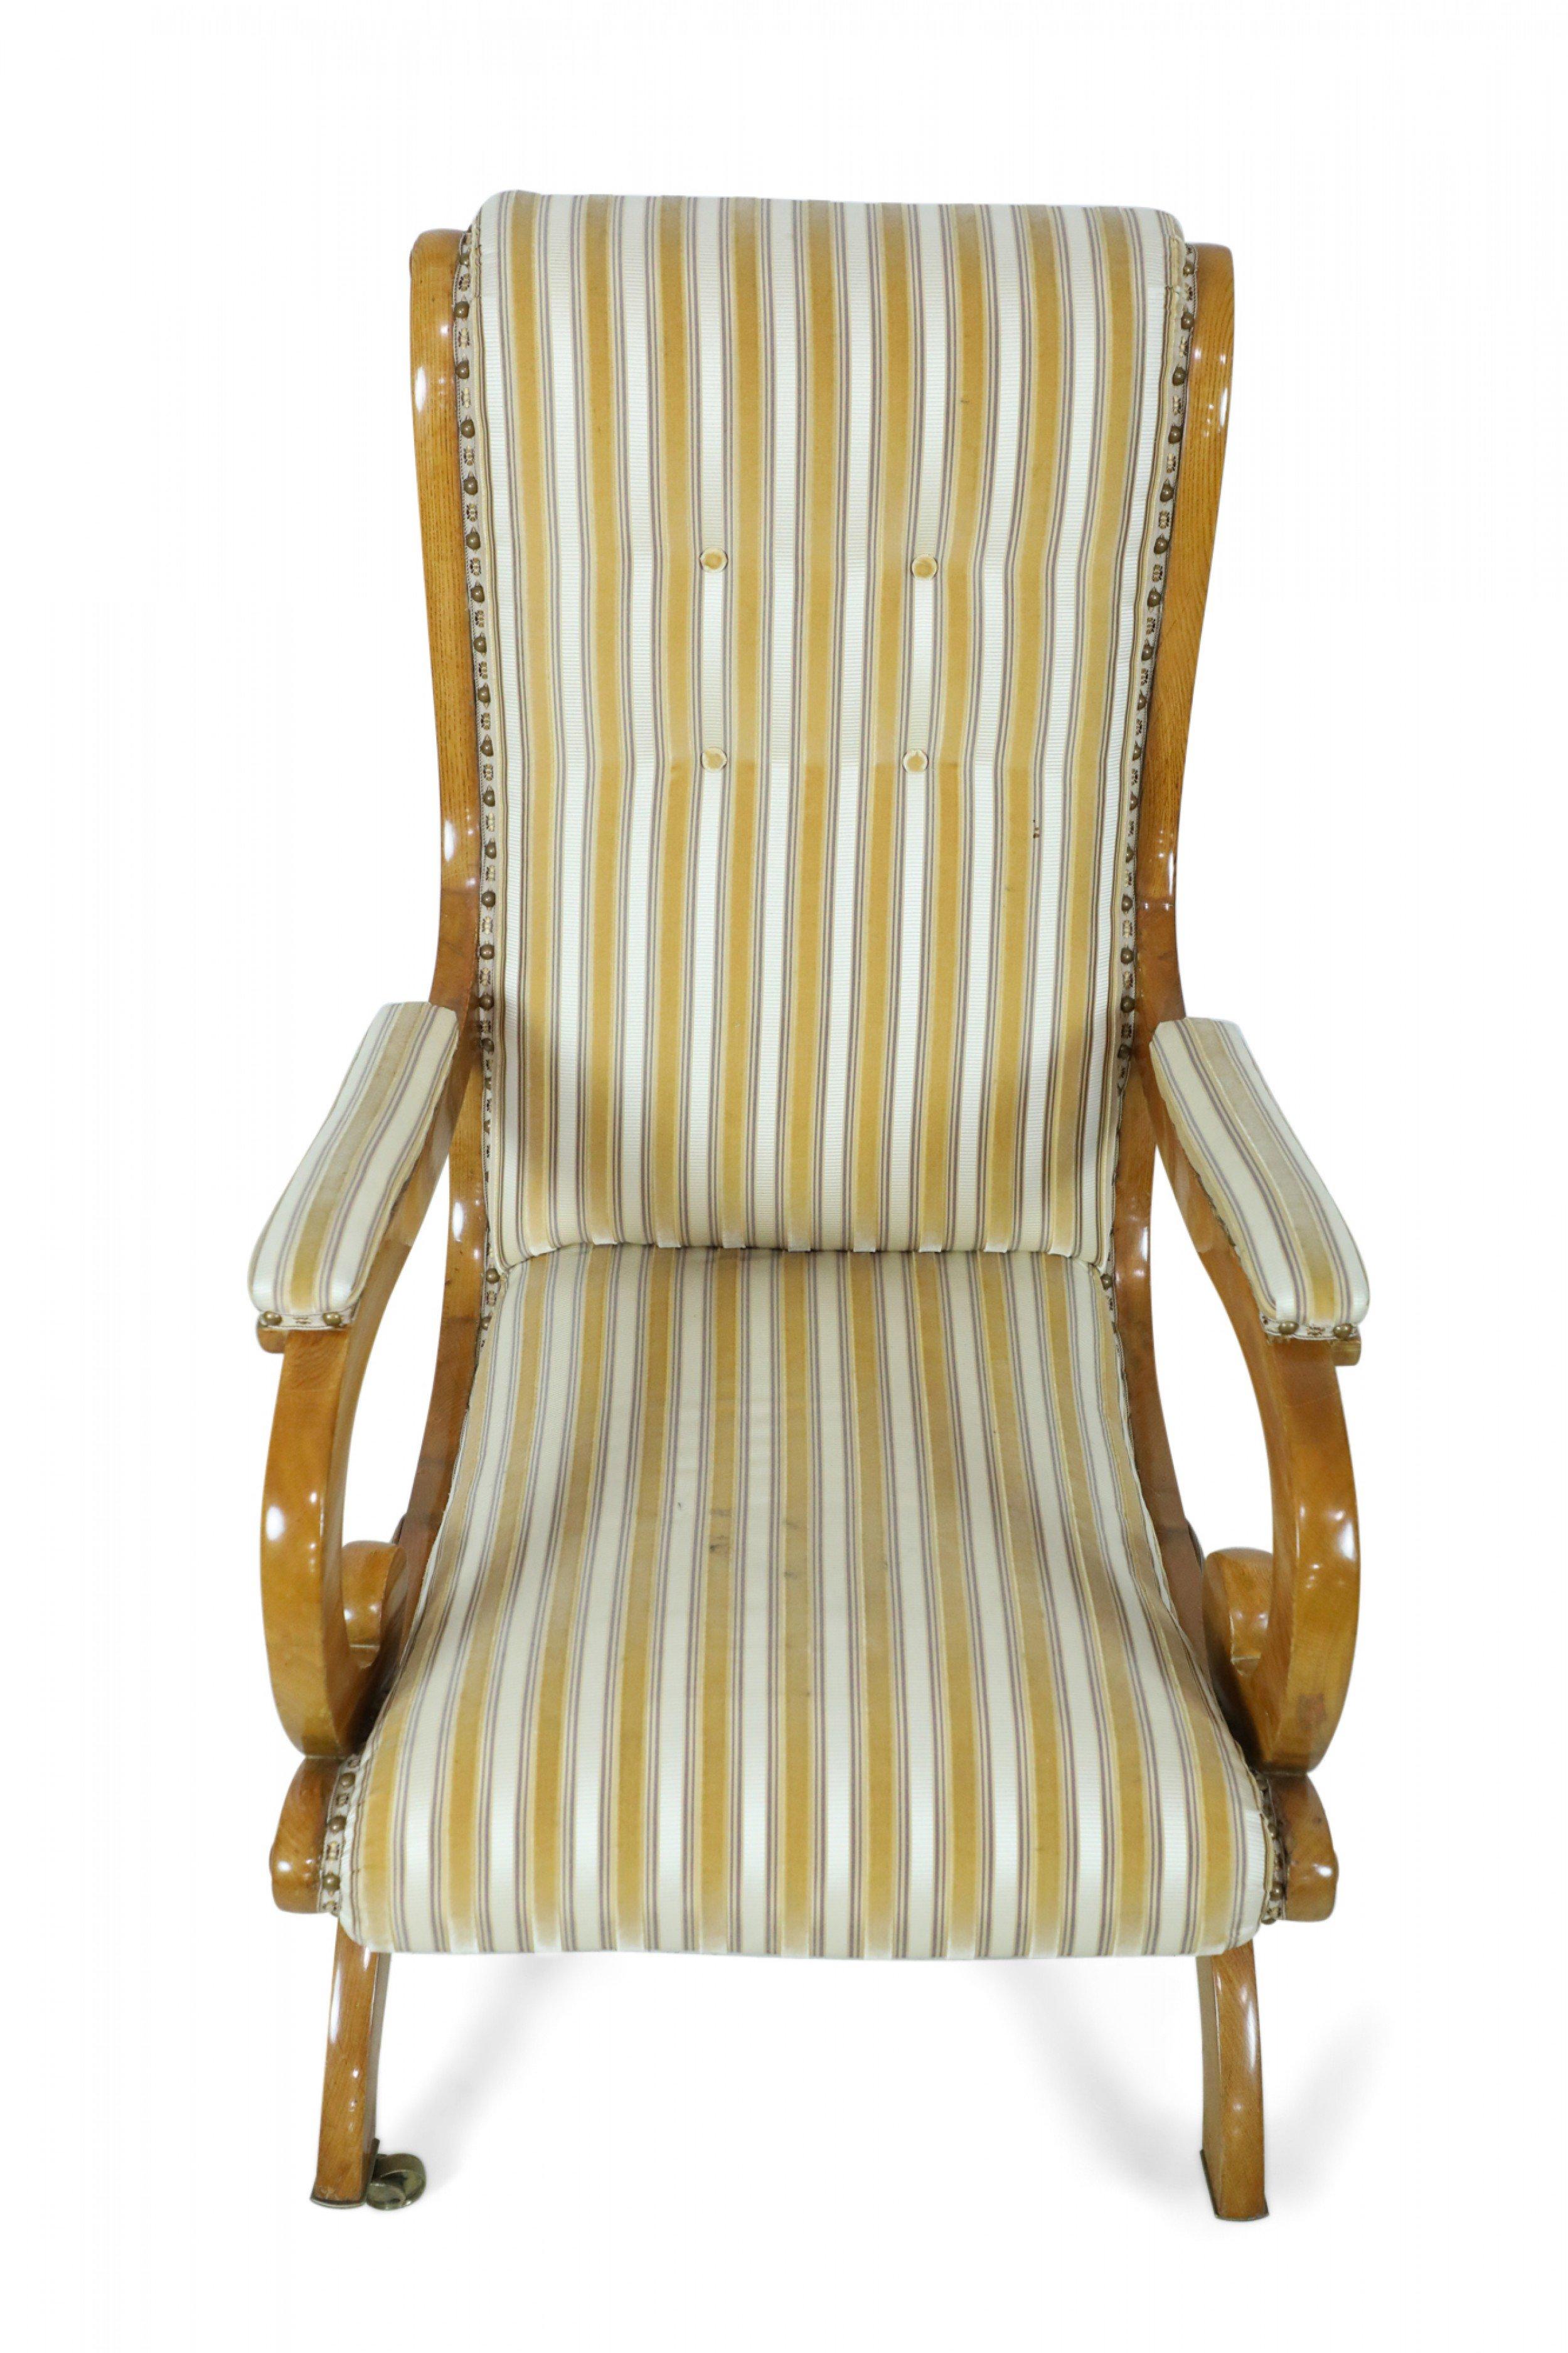 19th Century English Victorian Blond Wood Scroll Armchair with Striped Upholstery For Sale